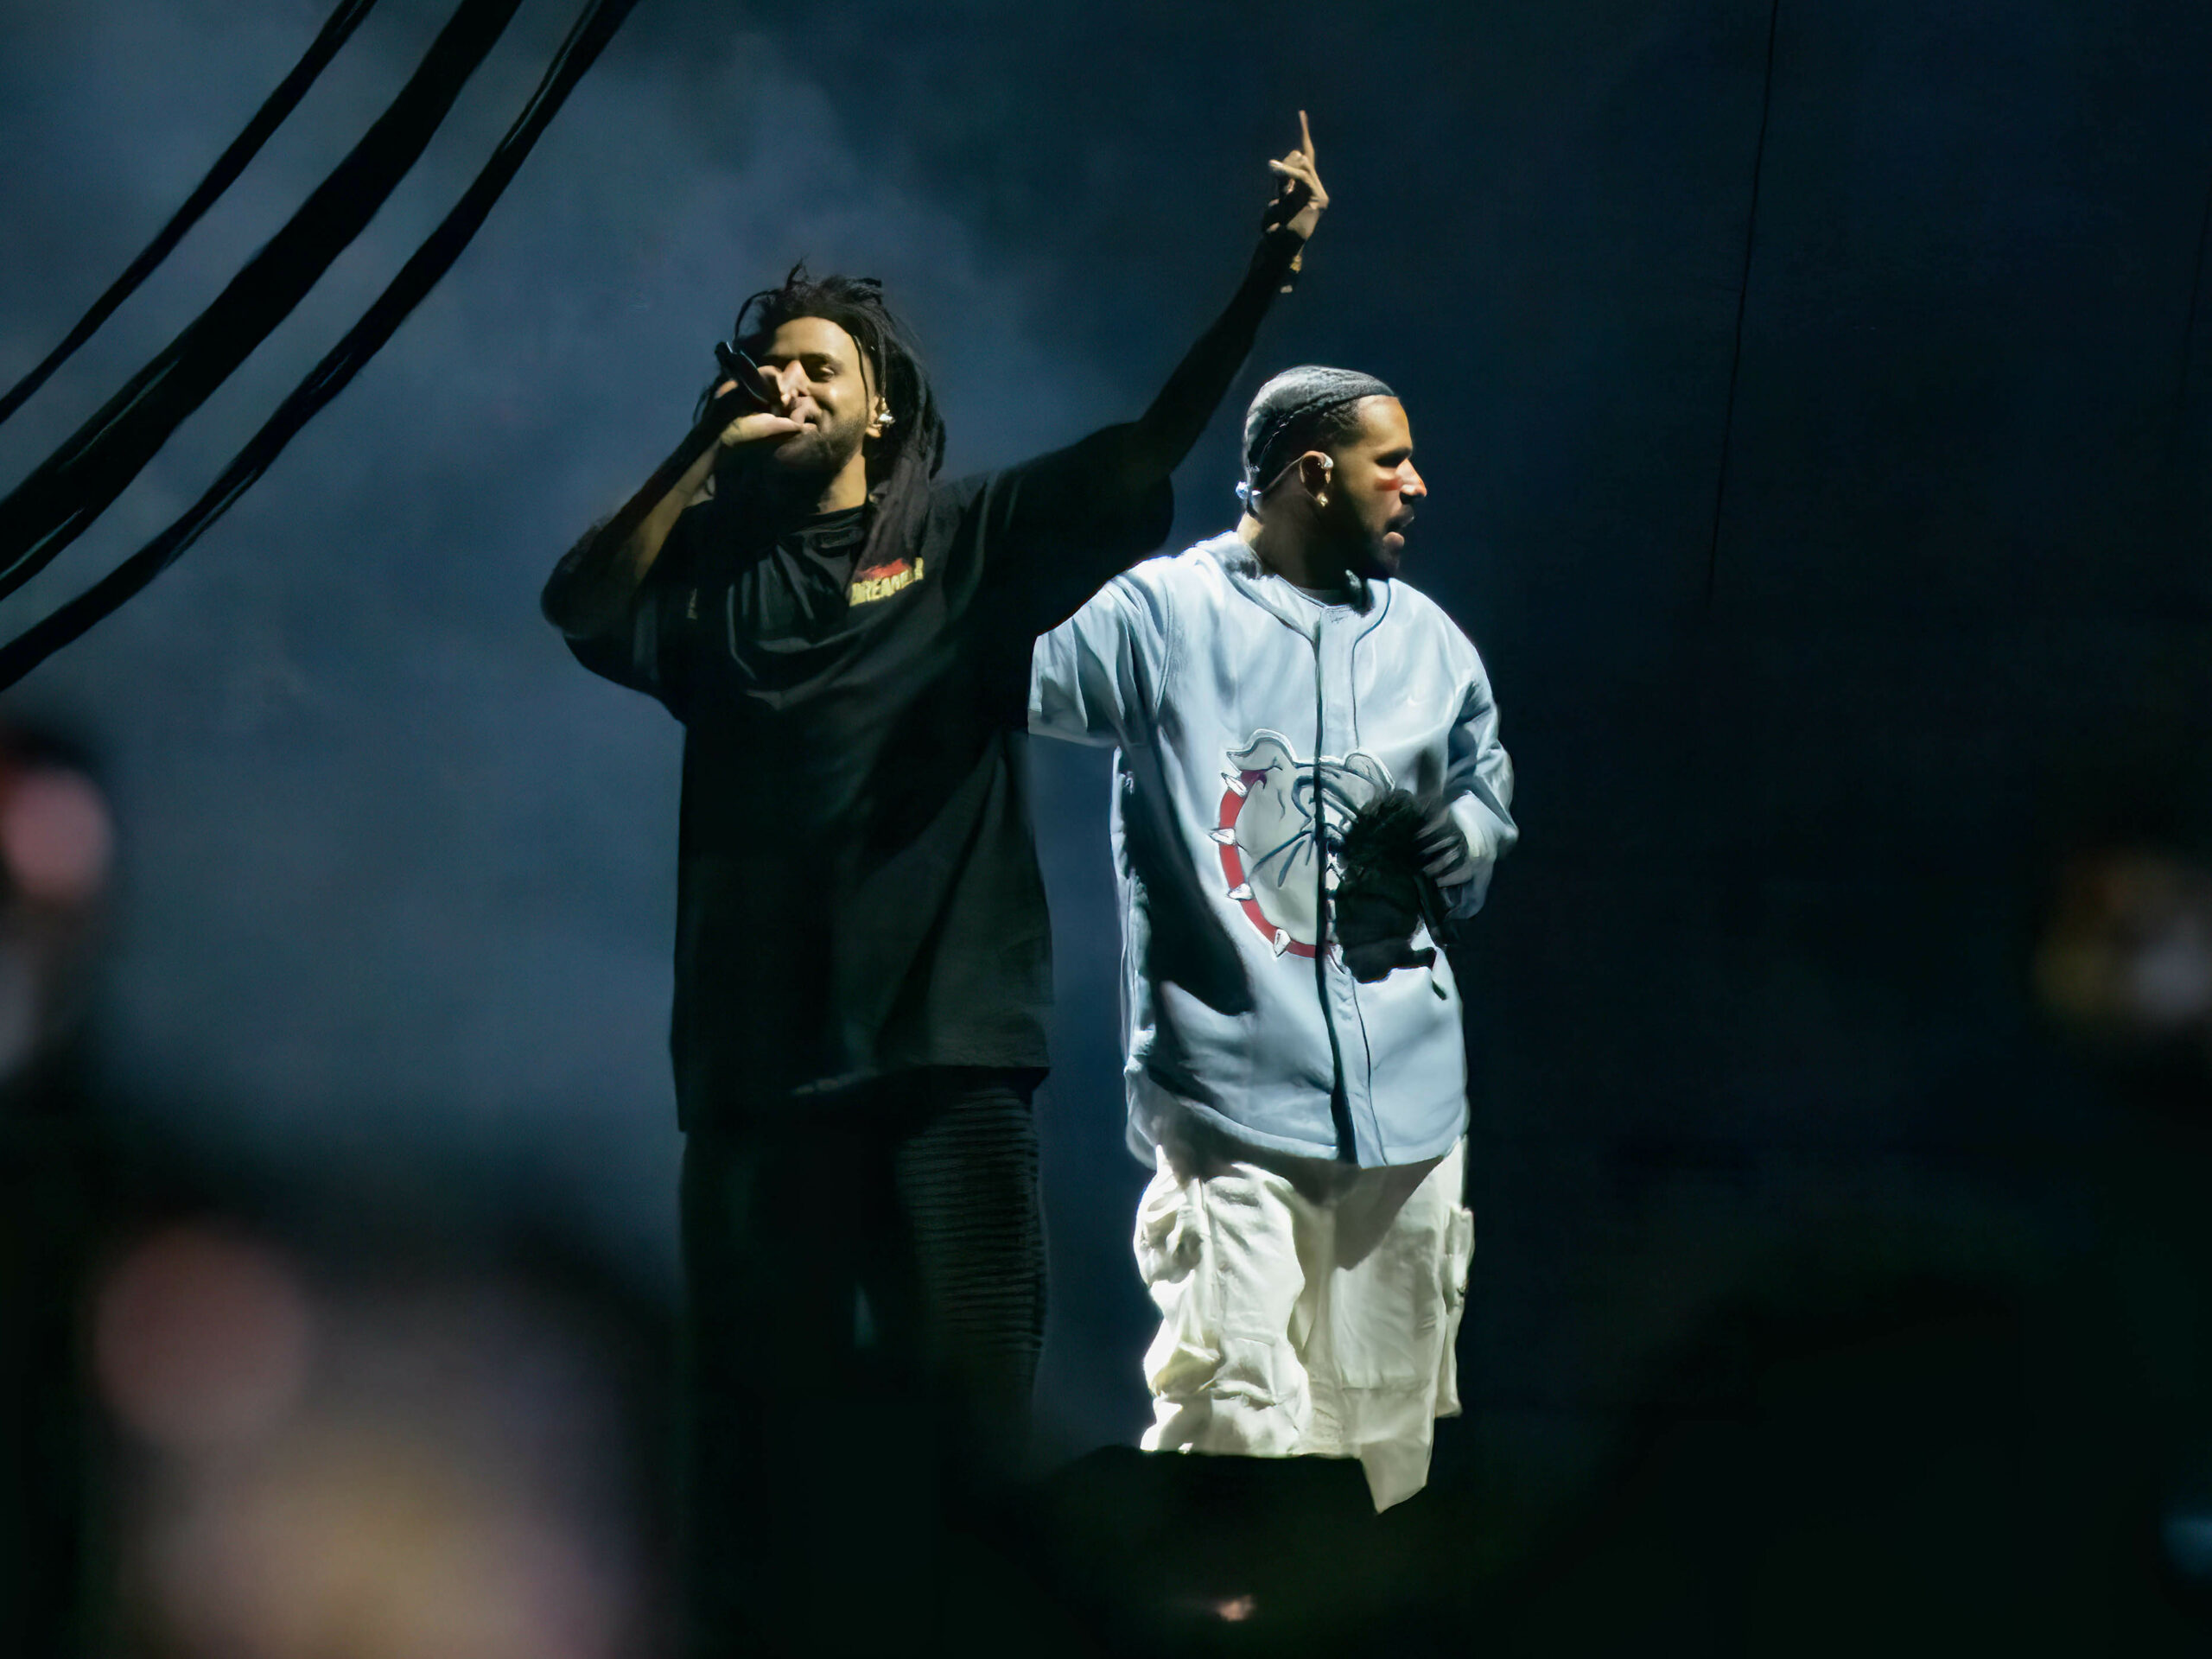 J. Cole and Drake perform during the 2023 edition of Cole's Dreamville Festival in Raleigh, N.C., last April. Their collaborative track "First Person Shooter" recently touched off a conflict with fellow MC Kendrick Lamar.